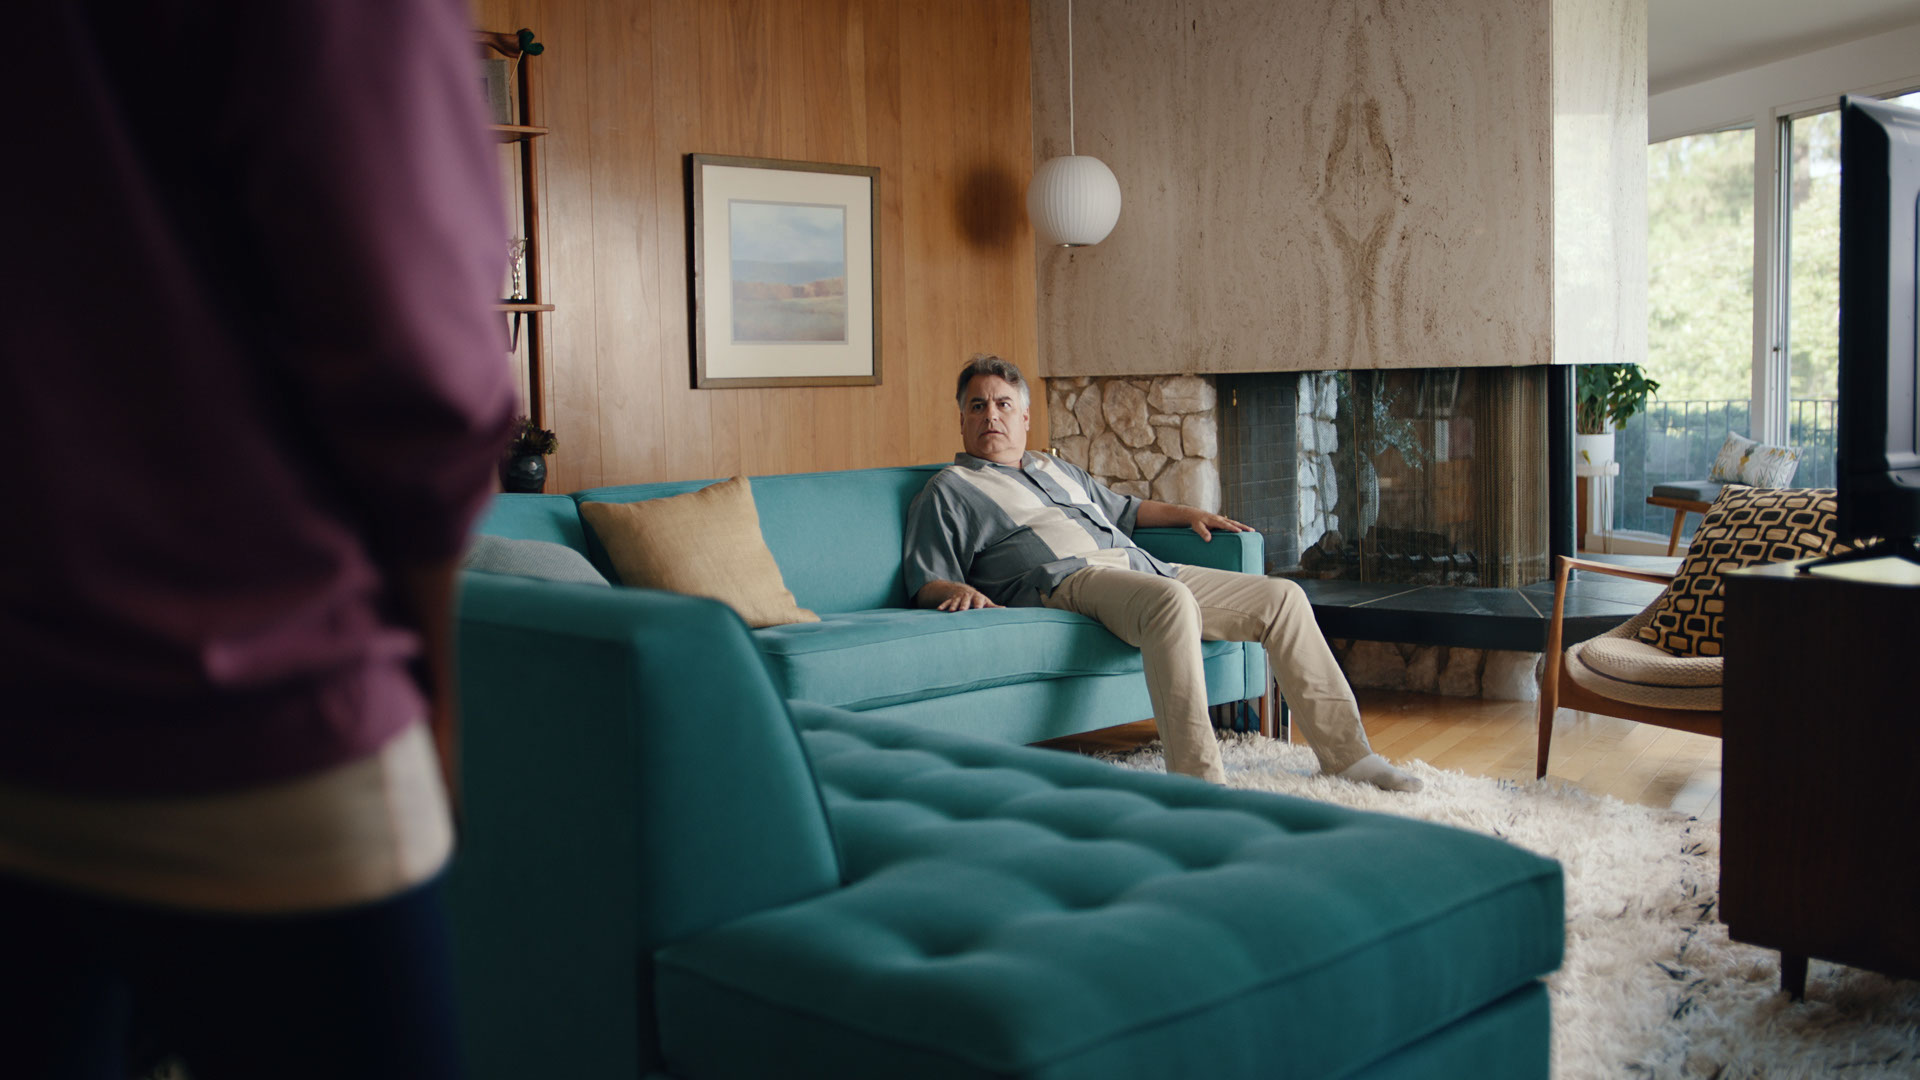 A man sitting on a couch looking at another person.